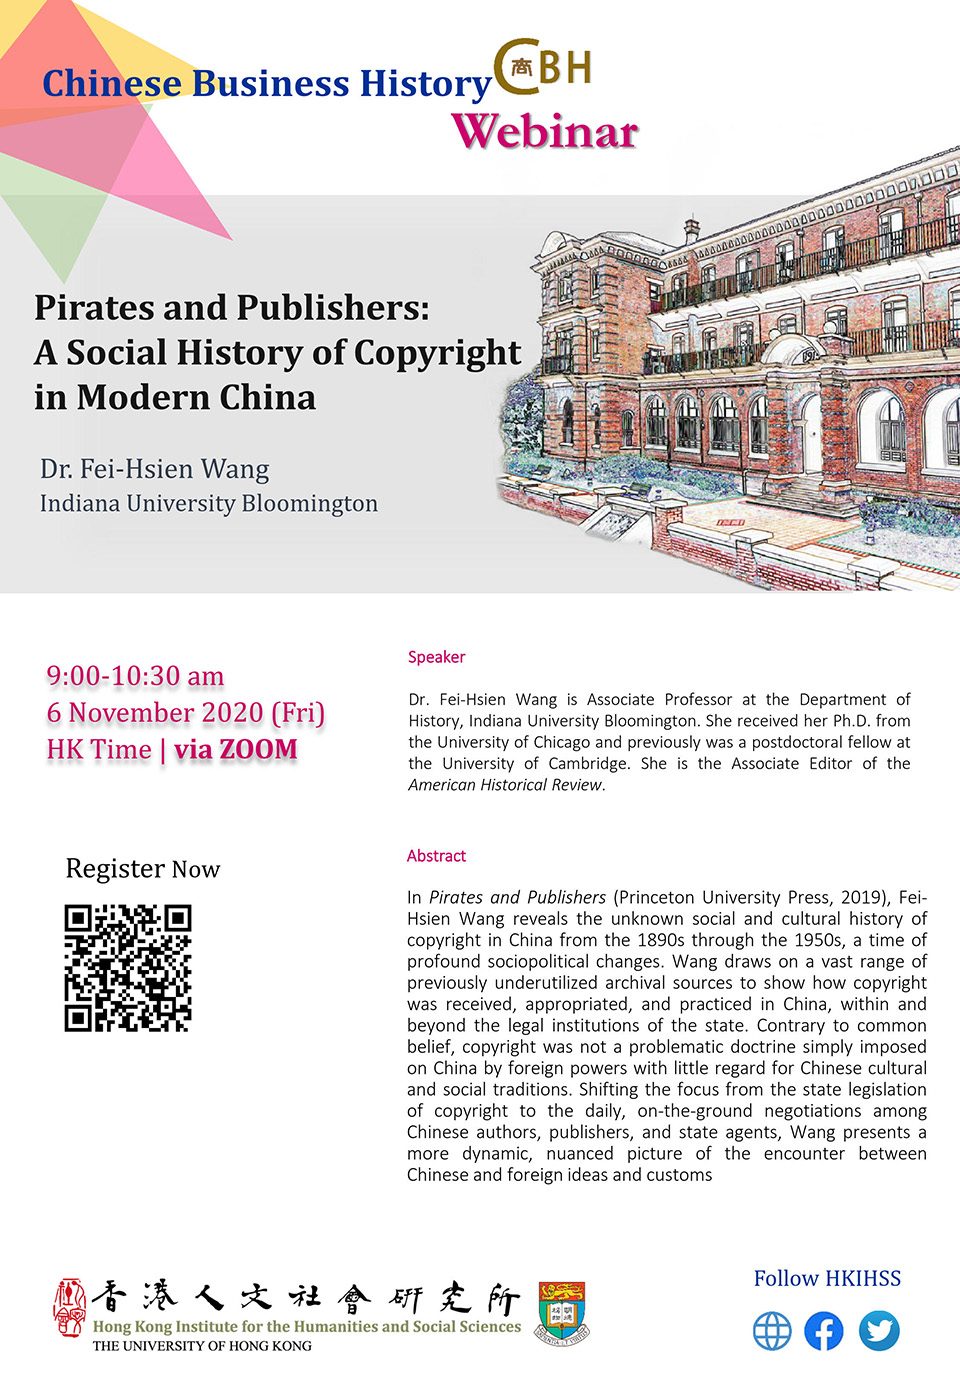 Chinese Business History Webinar on “Pirates and Publishers: A Social History of Copyright in Modern China” by Dr. Fei-Hsien Wang (November 6, 2020)